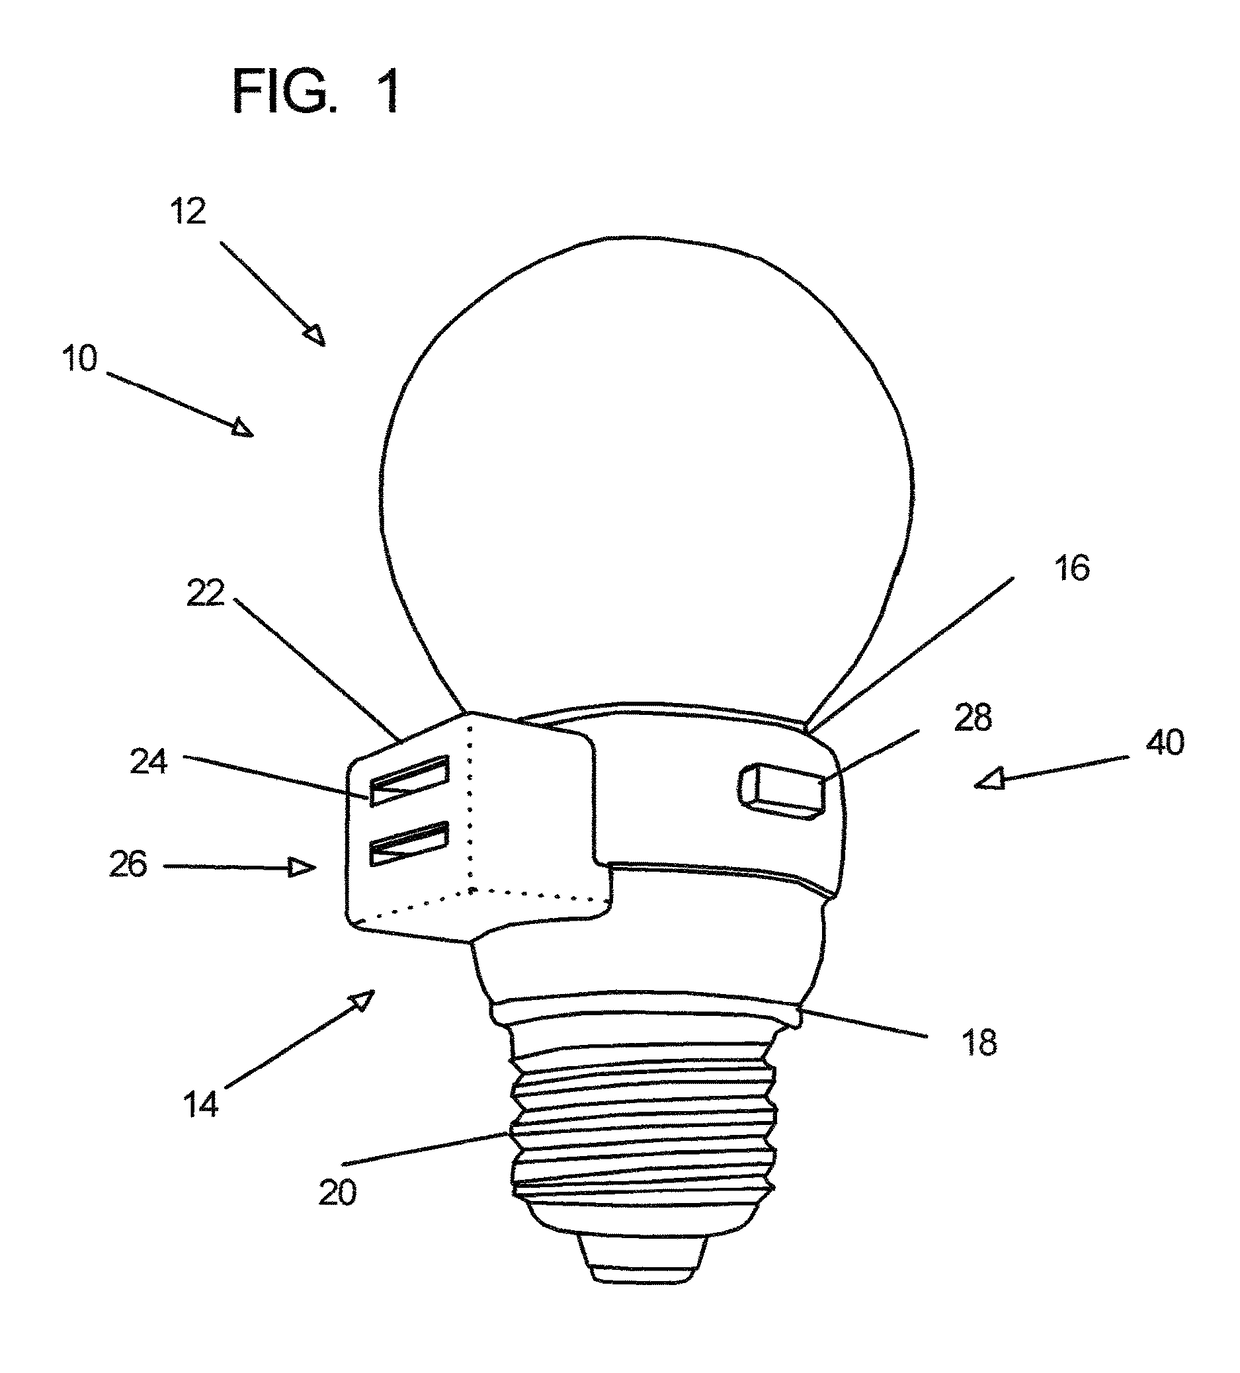 Light bulb device with functional features